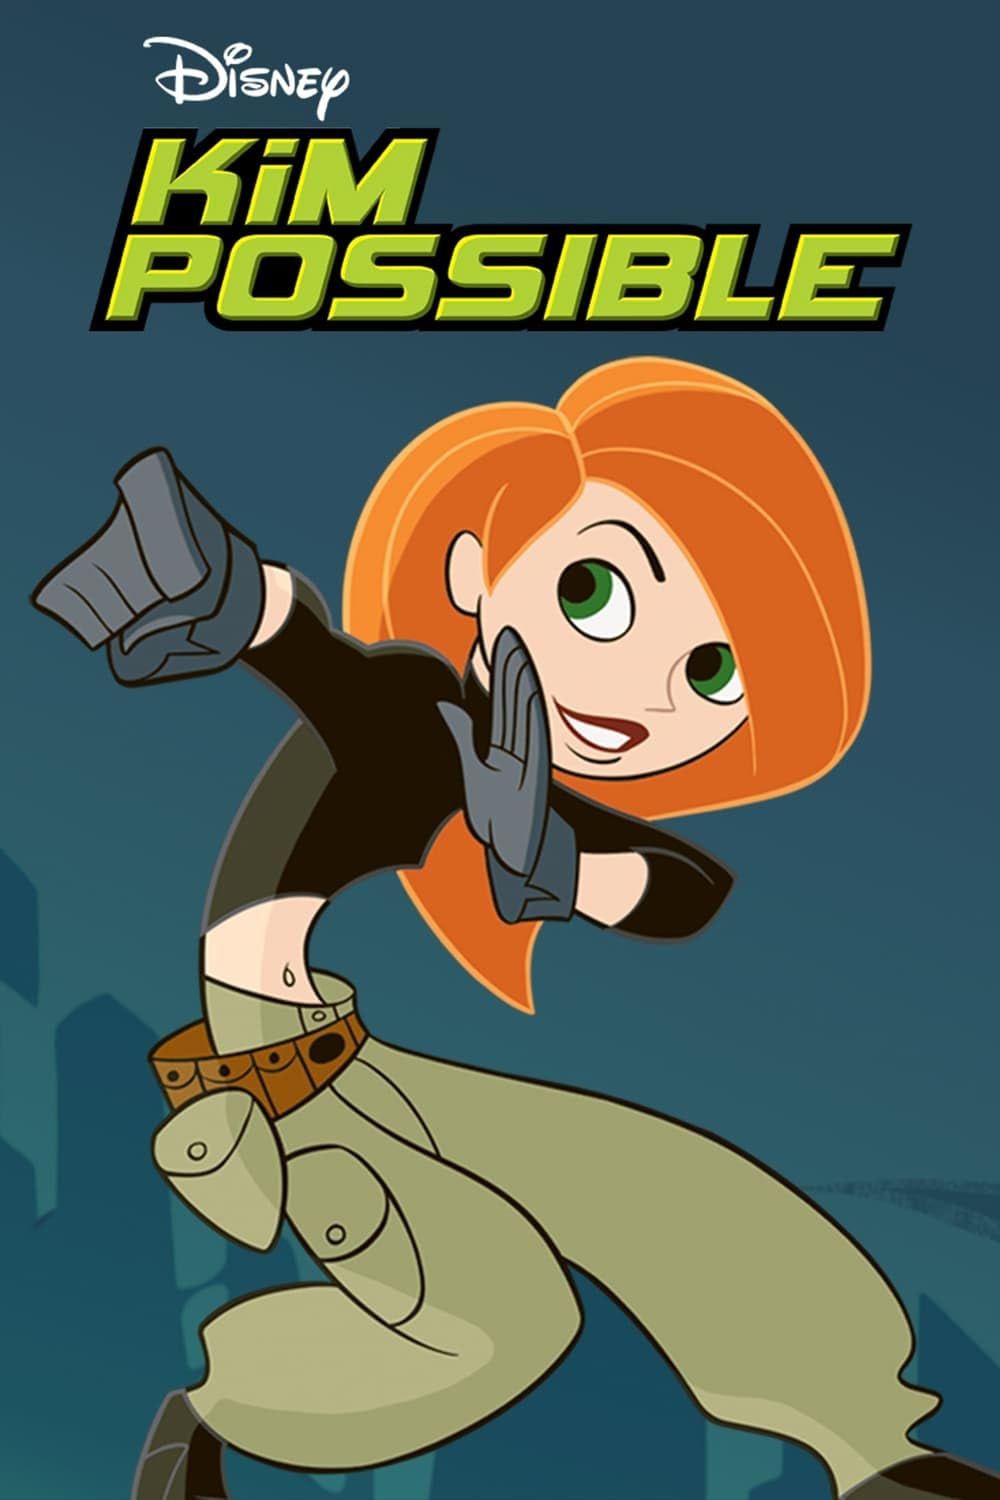 A poster for Kim Possible, who punches toward the camera in a battle pose